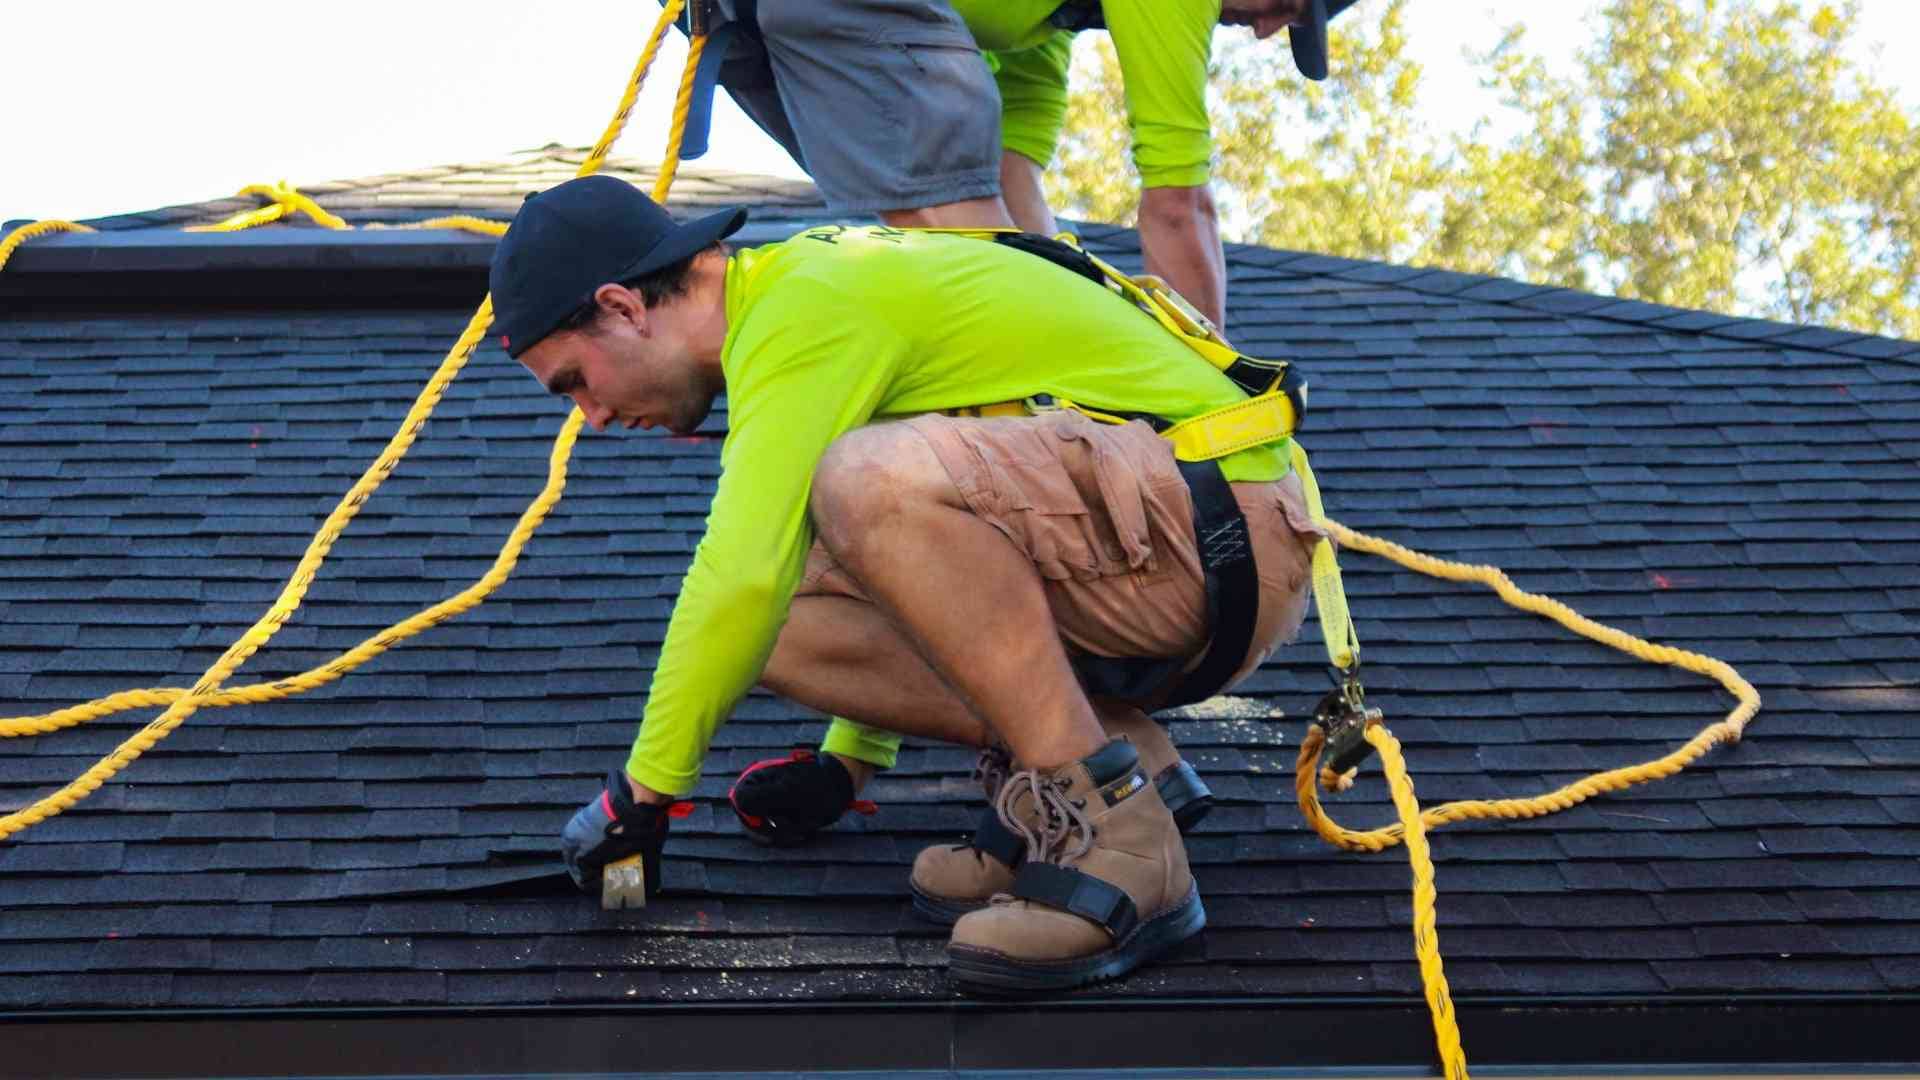 Roofing contractors working on an asphalt shingle roof